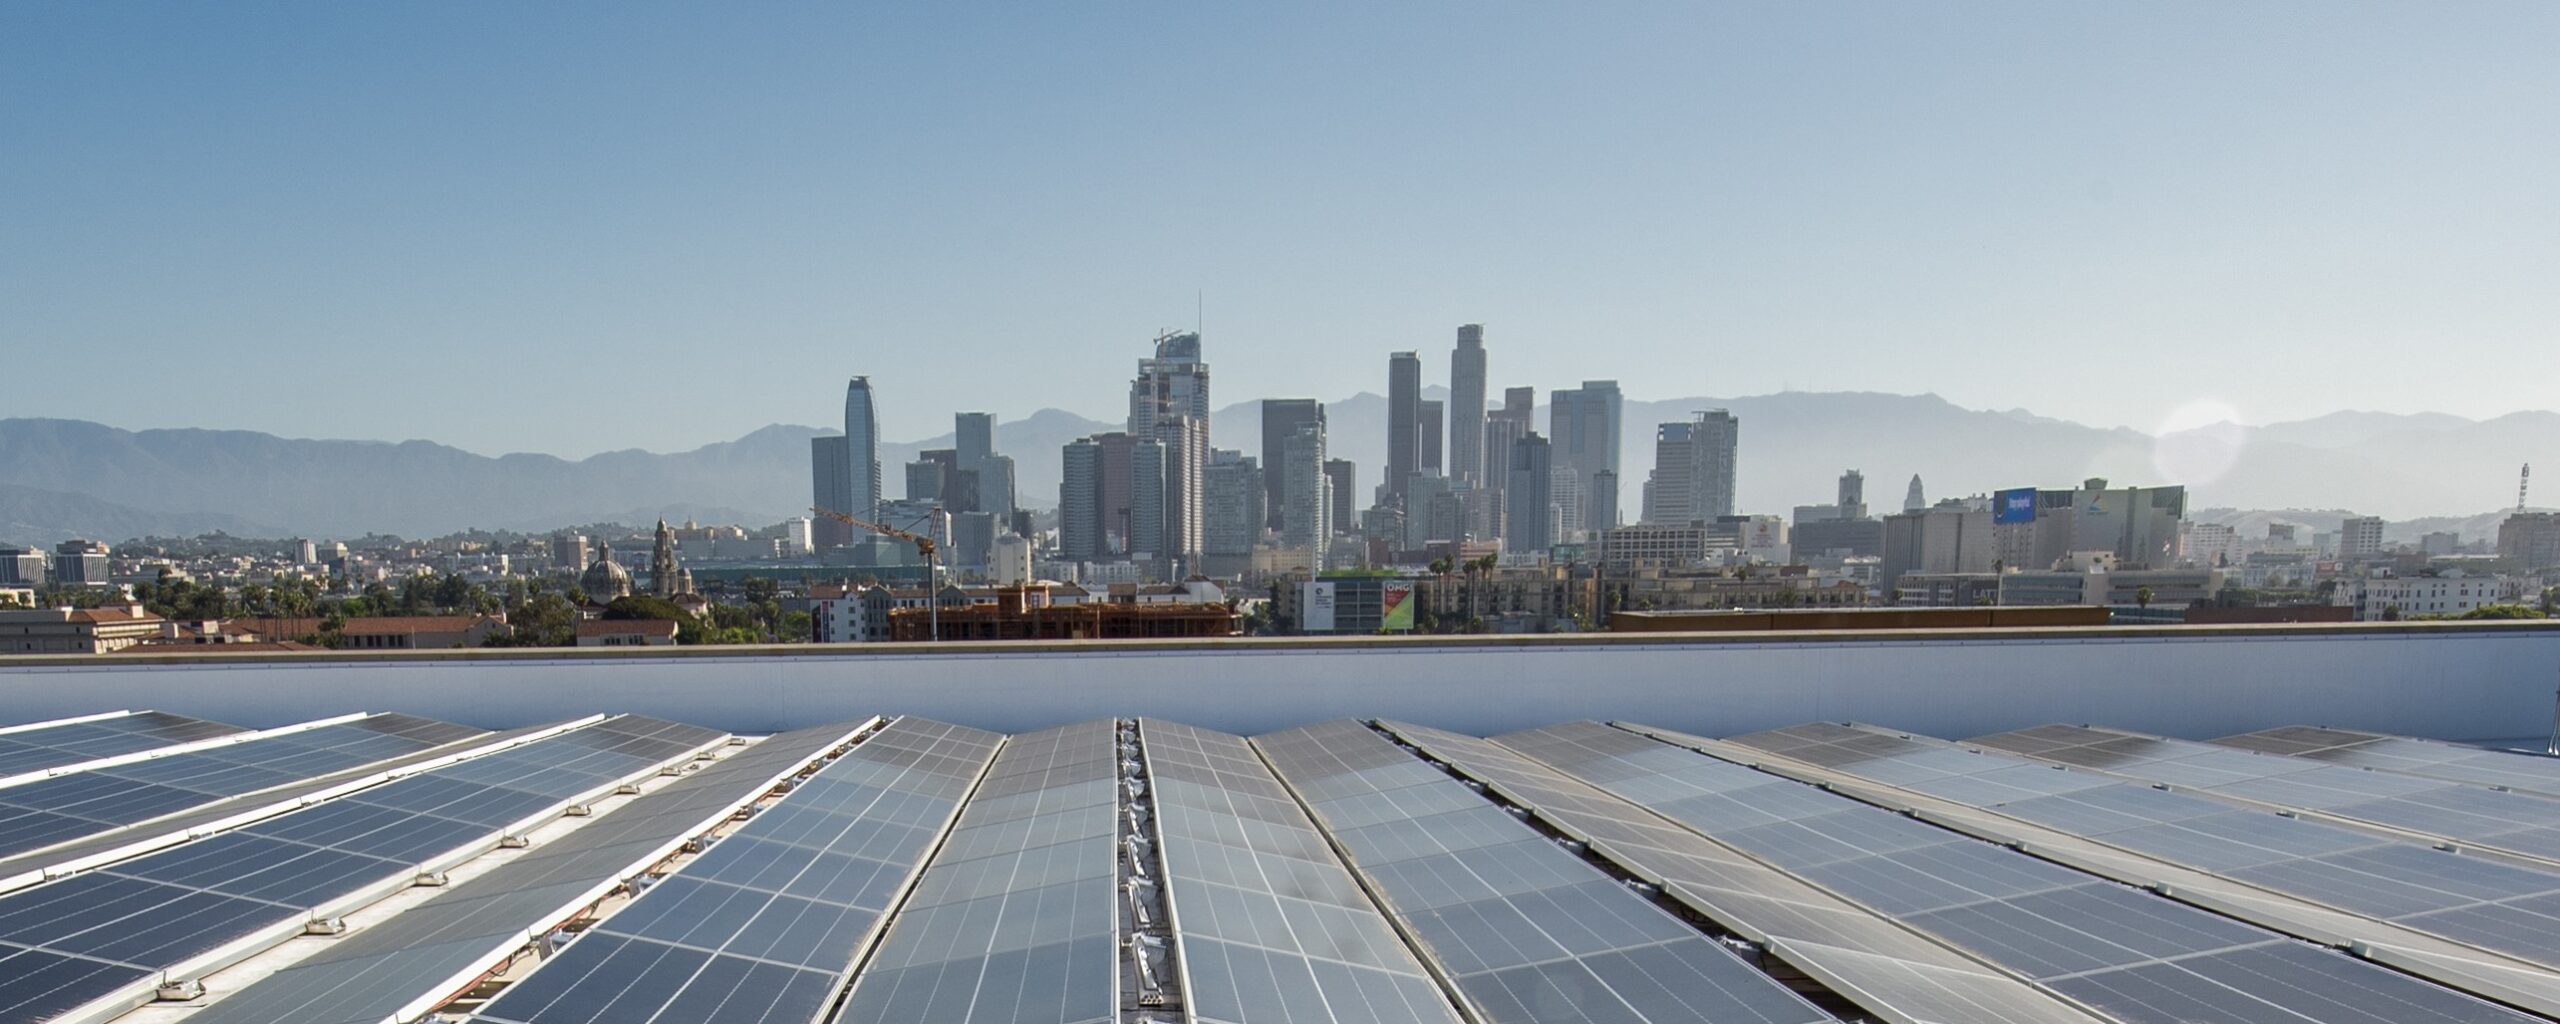 Solar panels on the roof of the Galen Center, with the Los Angeles skyline in the background.